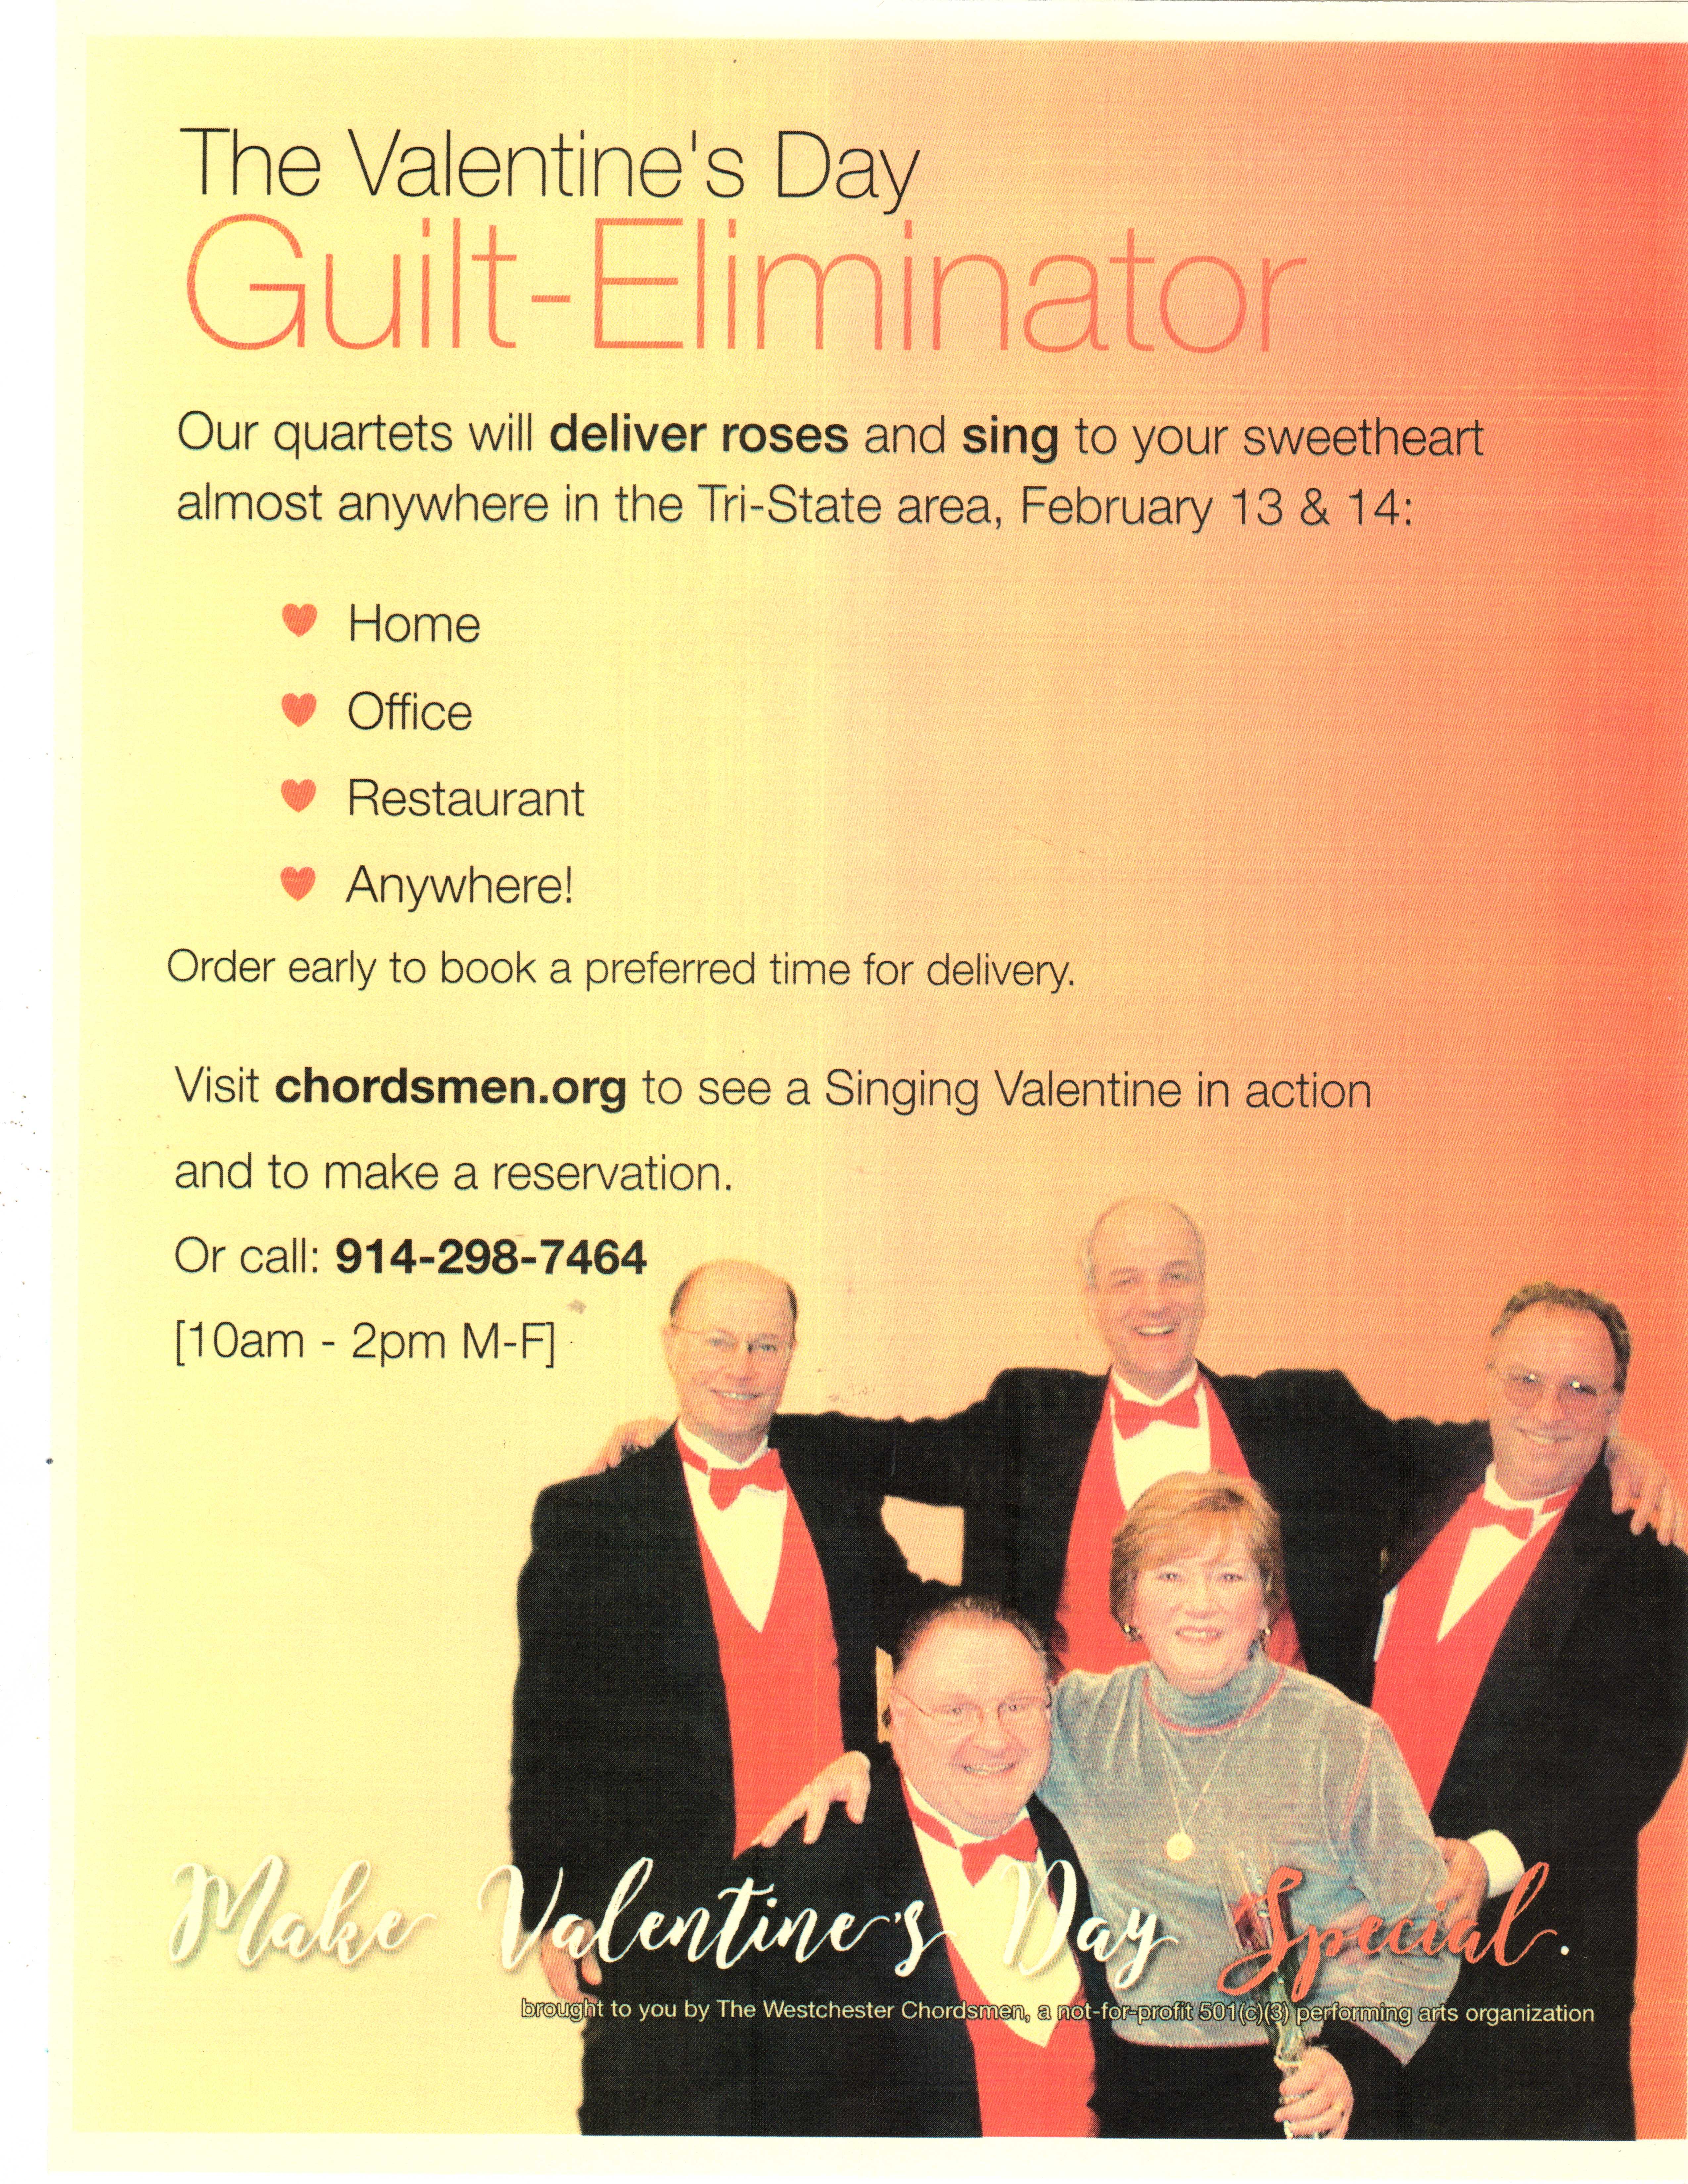 A Singing Valentine-- a gift like no other!!